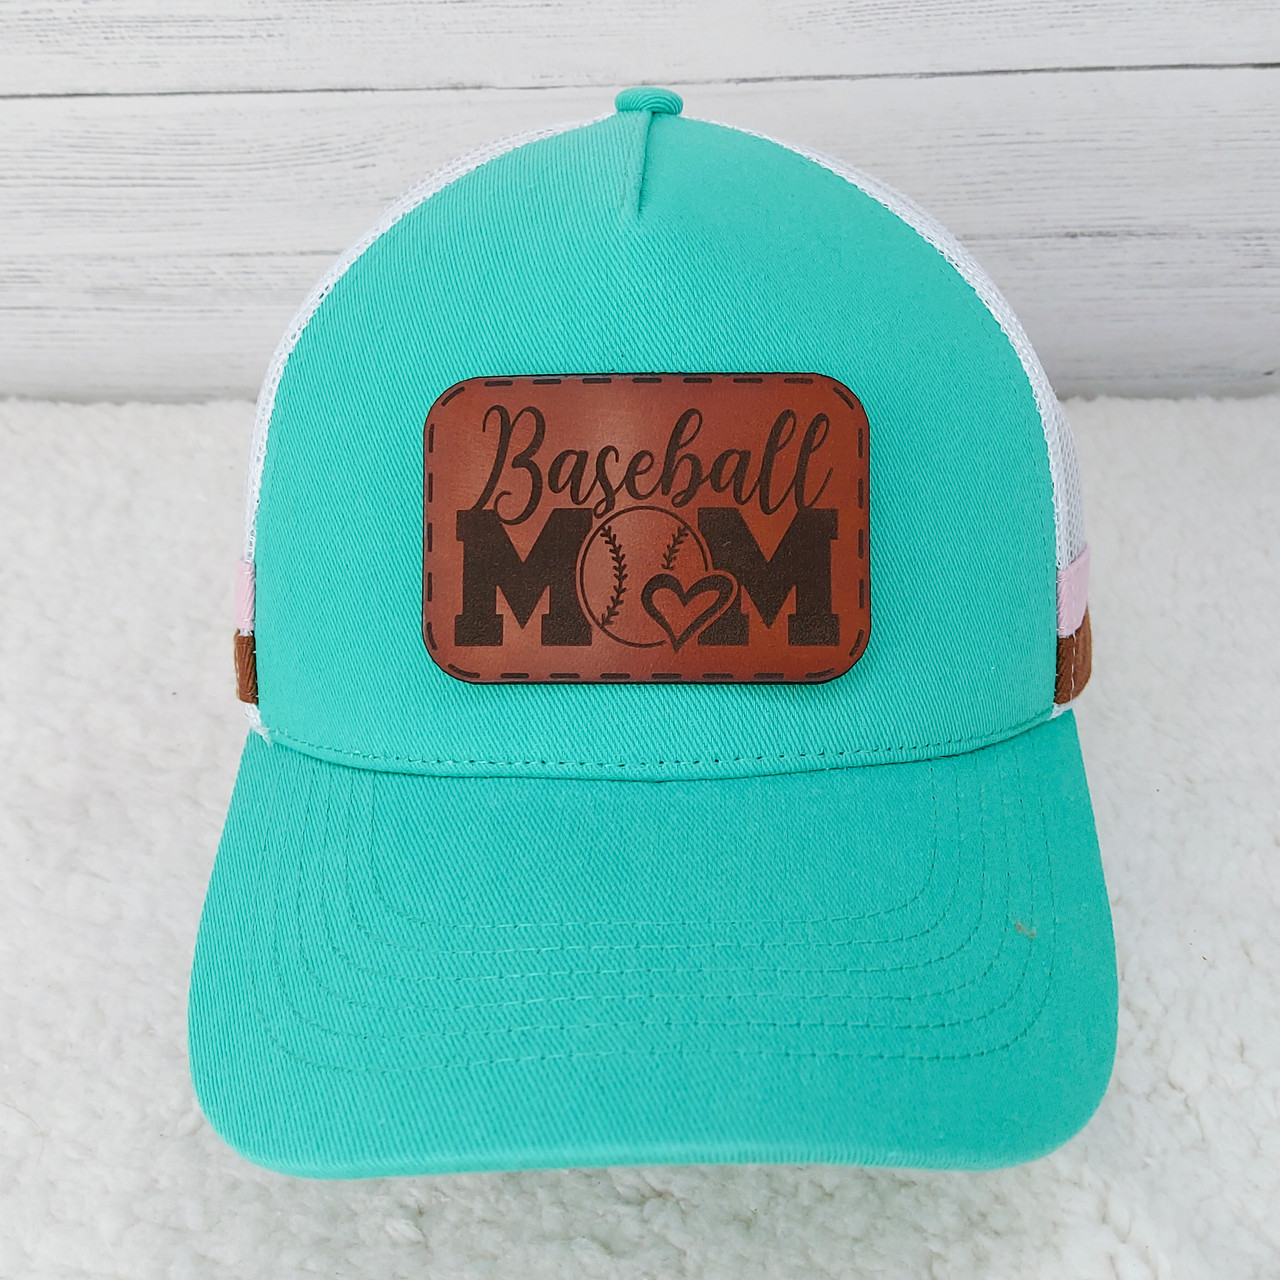 Mama Leather Patch, Leather Hat Patch, Leather Patches for Hats